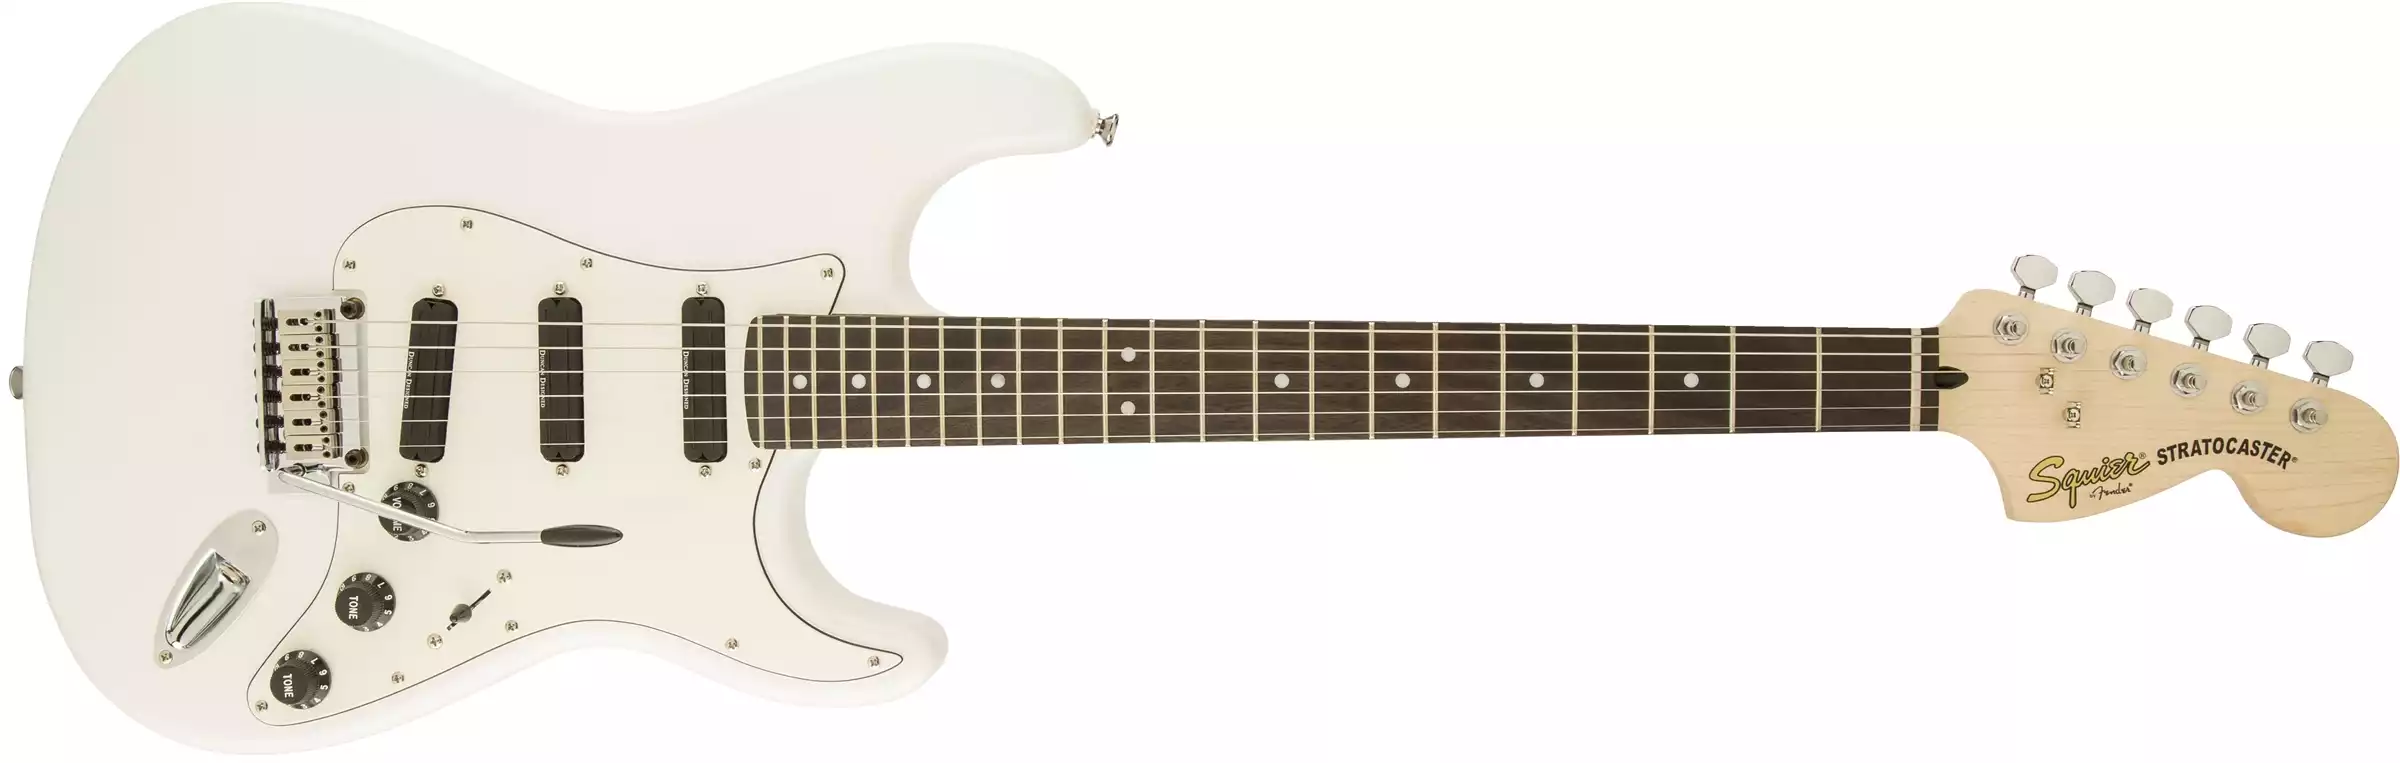 Squier by Fender Deluxe Hot Rails Stratocaster